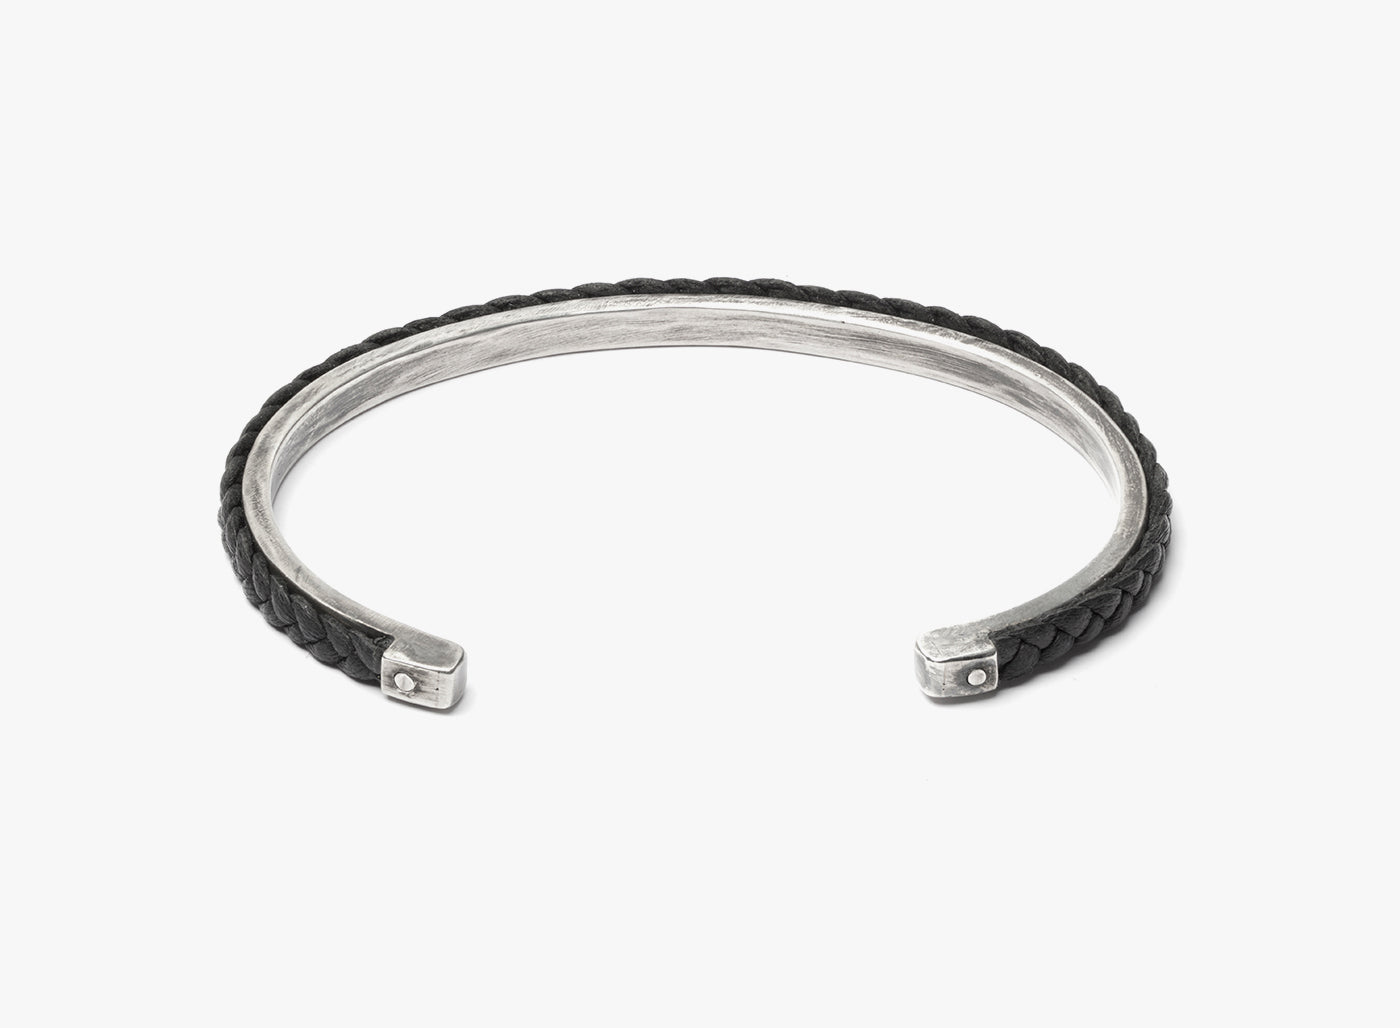 LEATHER BRACELET 123: the dichotomy of firm & malleable is featured in this hand-braided napa leather that is riveted onto a 1/8" solid sterling cuff